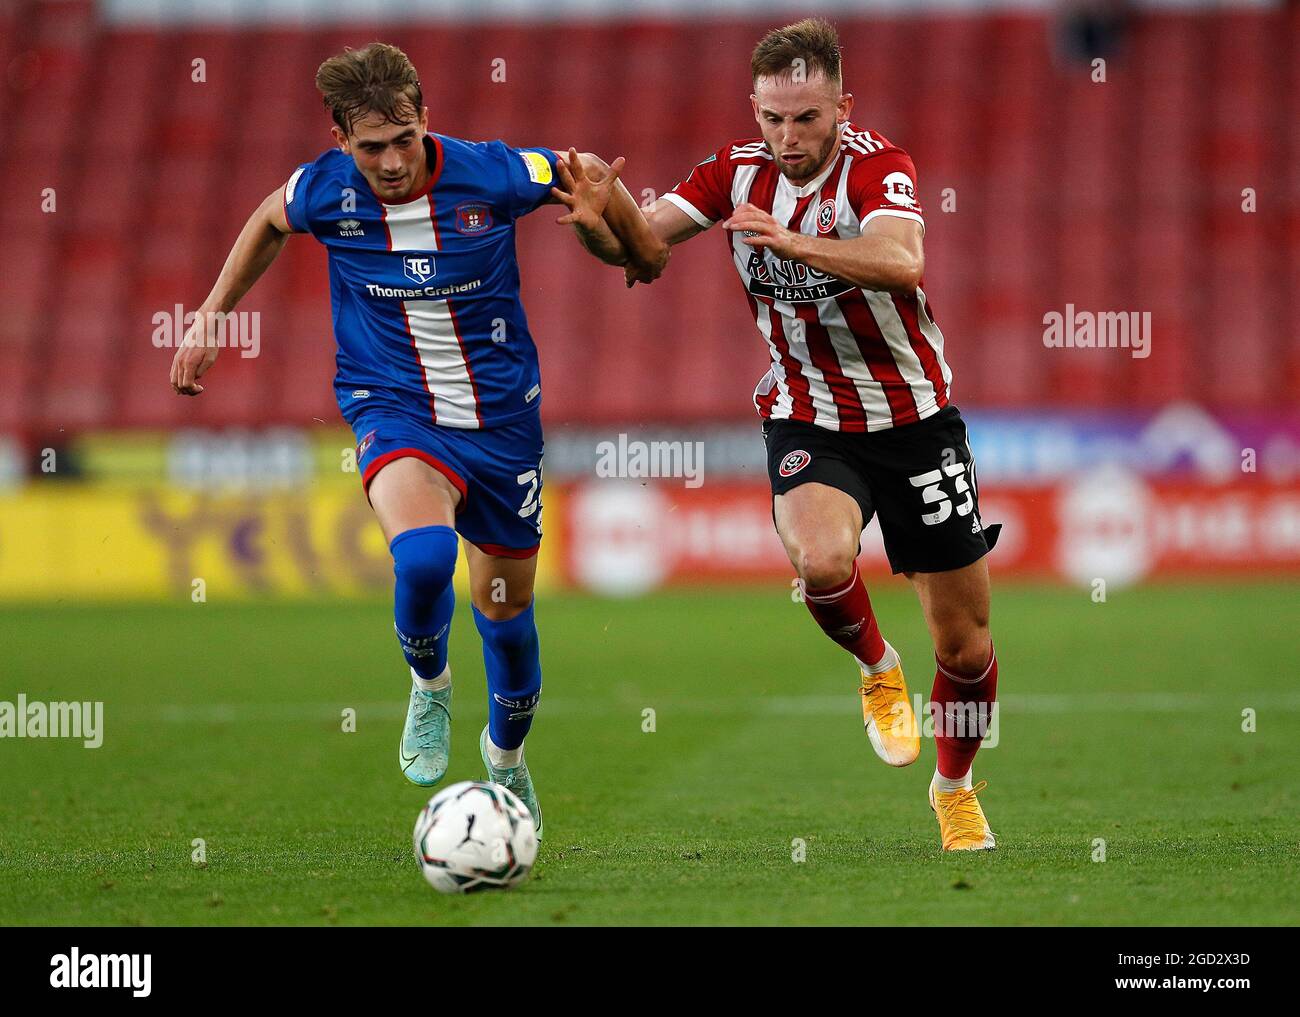 Sheffield, England, 10th August 2021.  Rhys Norrington Davies of Sheffield Utd challenges Lewis Bell of Carlisle United during the Carabao Cup match at Bramall Lane, Sheffield. Picture credit should read: Darren Staples / Sportimage Stock Photo